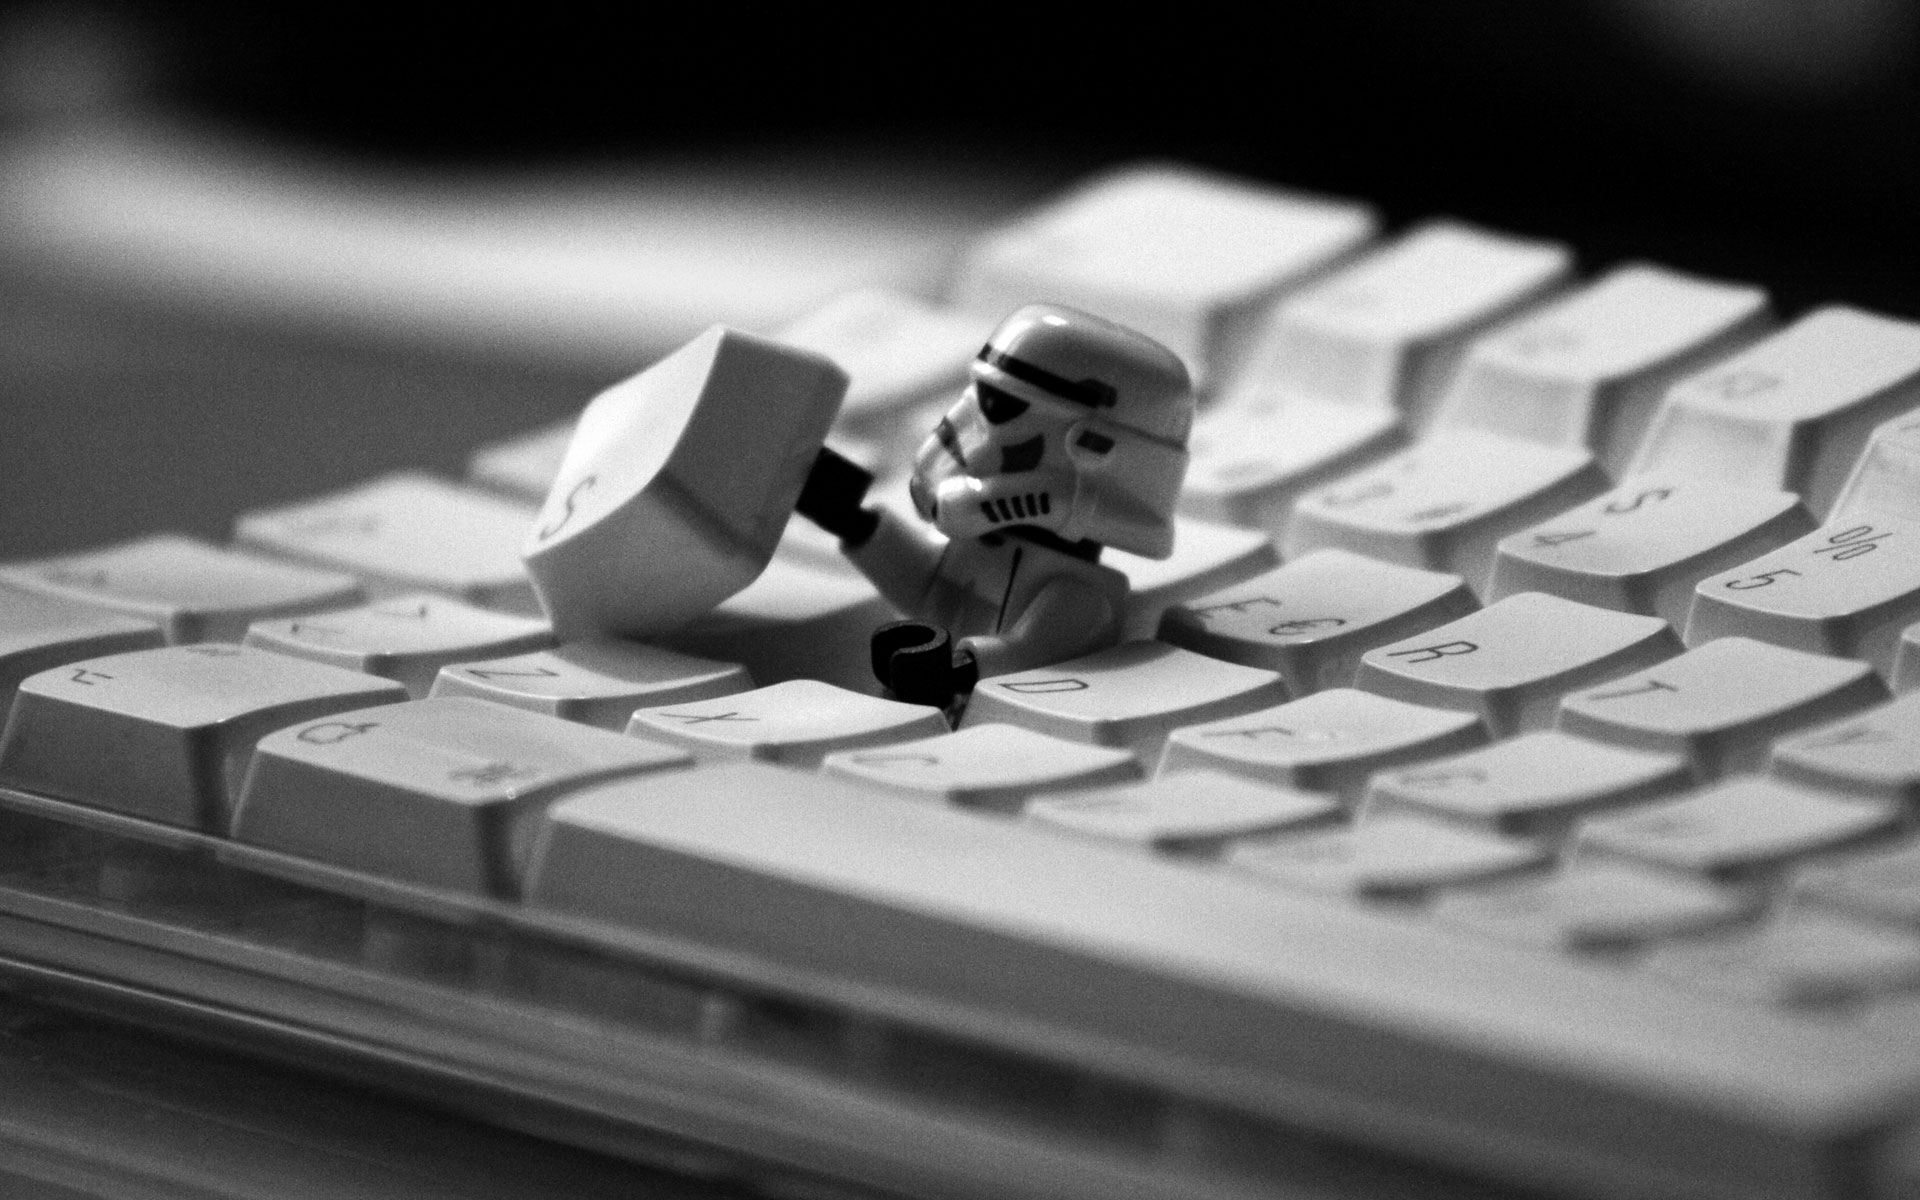 android keyboard, stormtrooper, products, lego, star wars